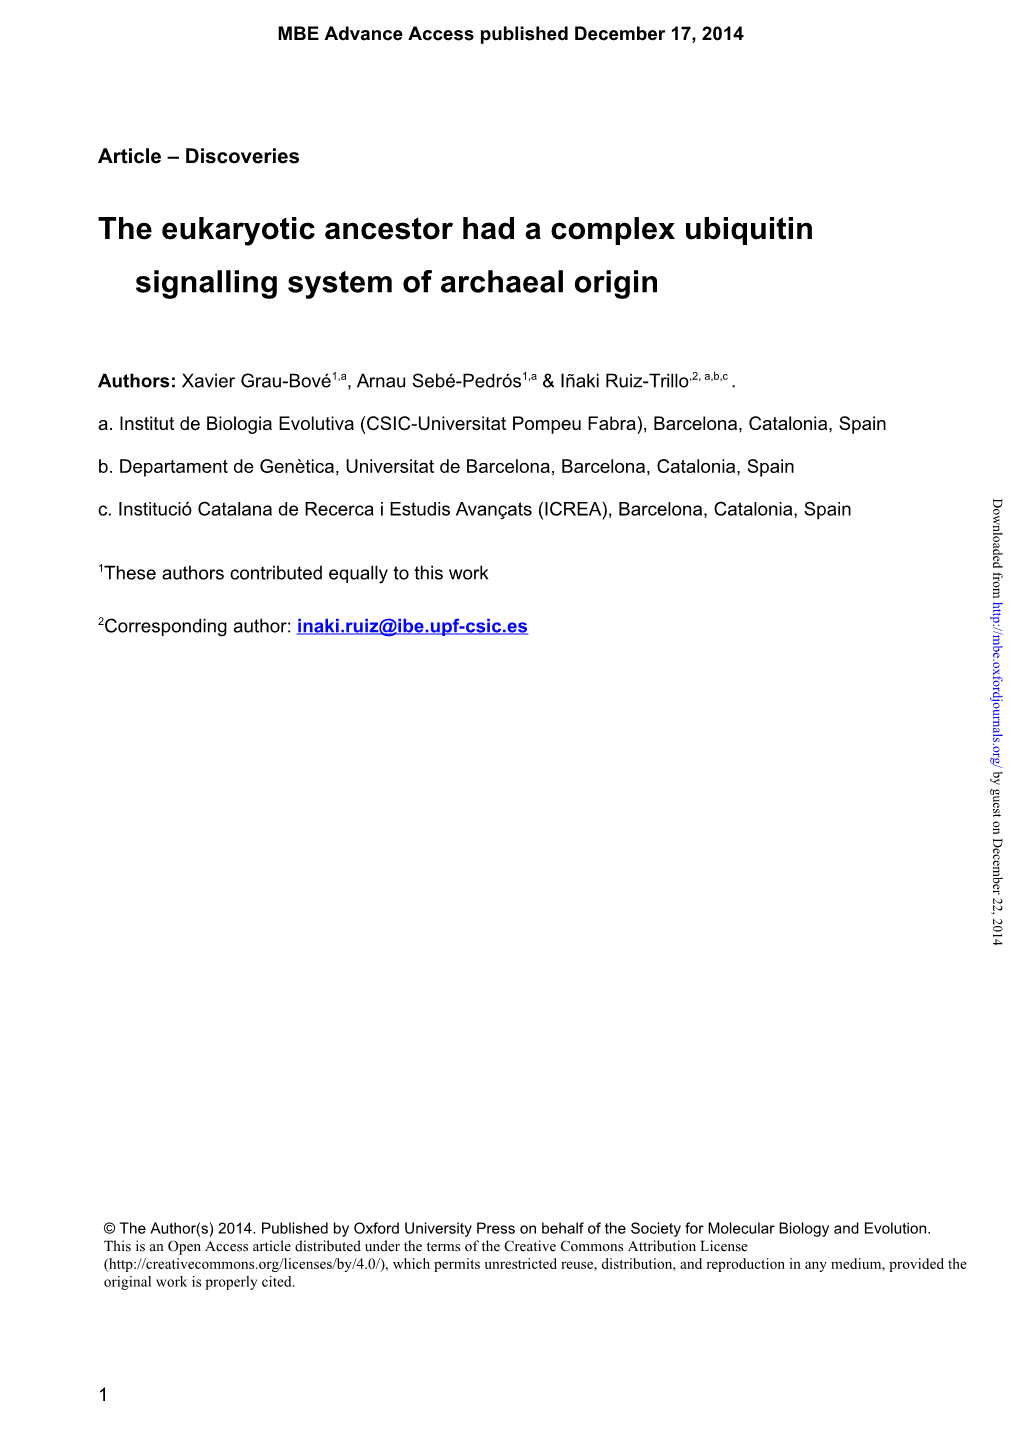 The Eukaryotic Ancestor Had a Complex Ubiquitin Signalling System of Archaeal Origin